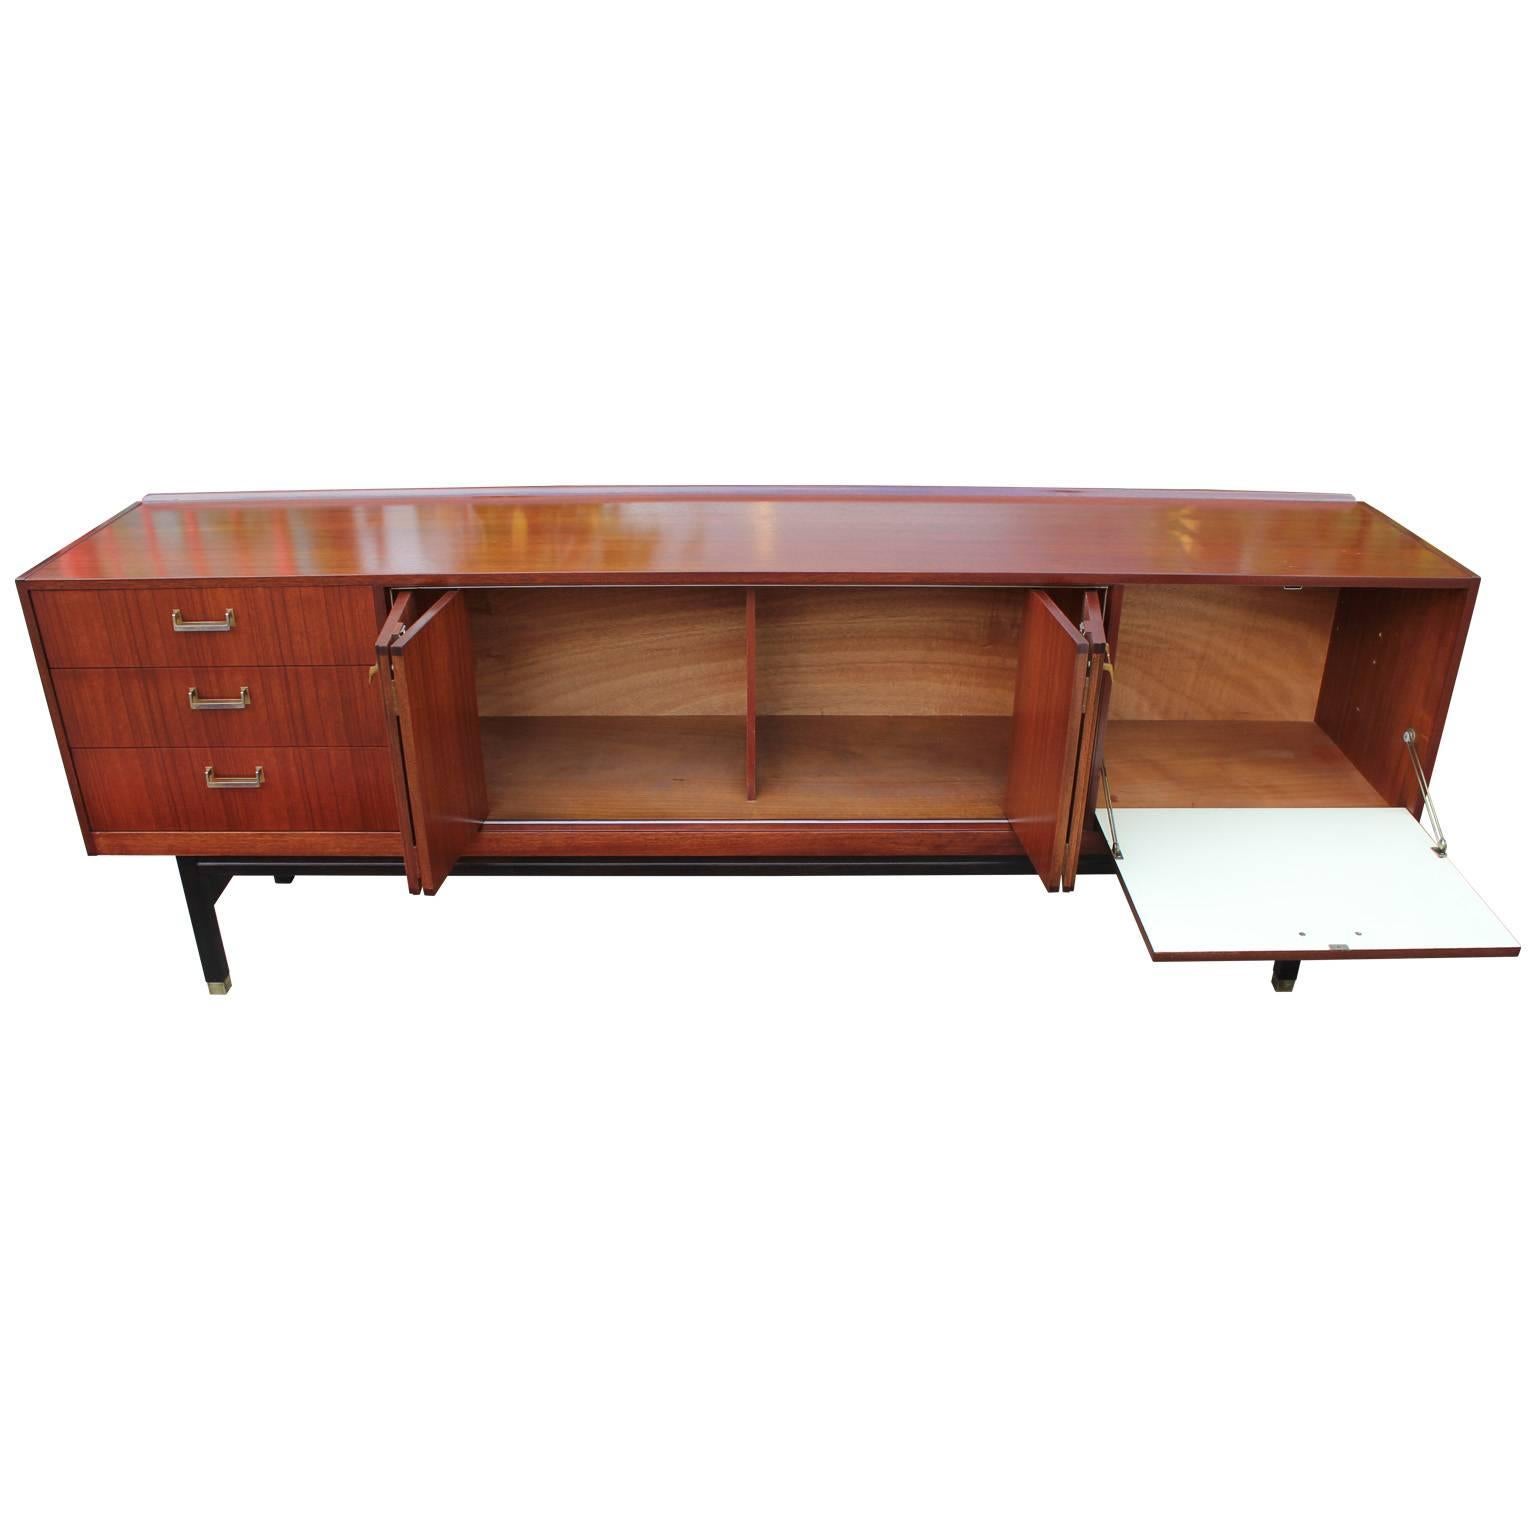 English Elegant Modern Sideboard / Credenza with Brass Hardware and Drop Down Door